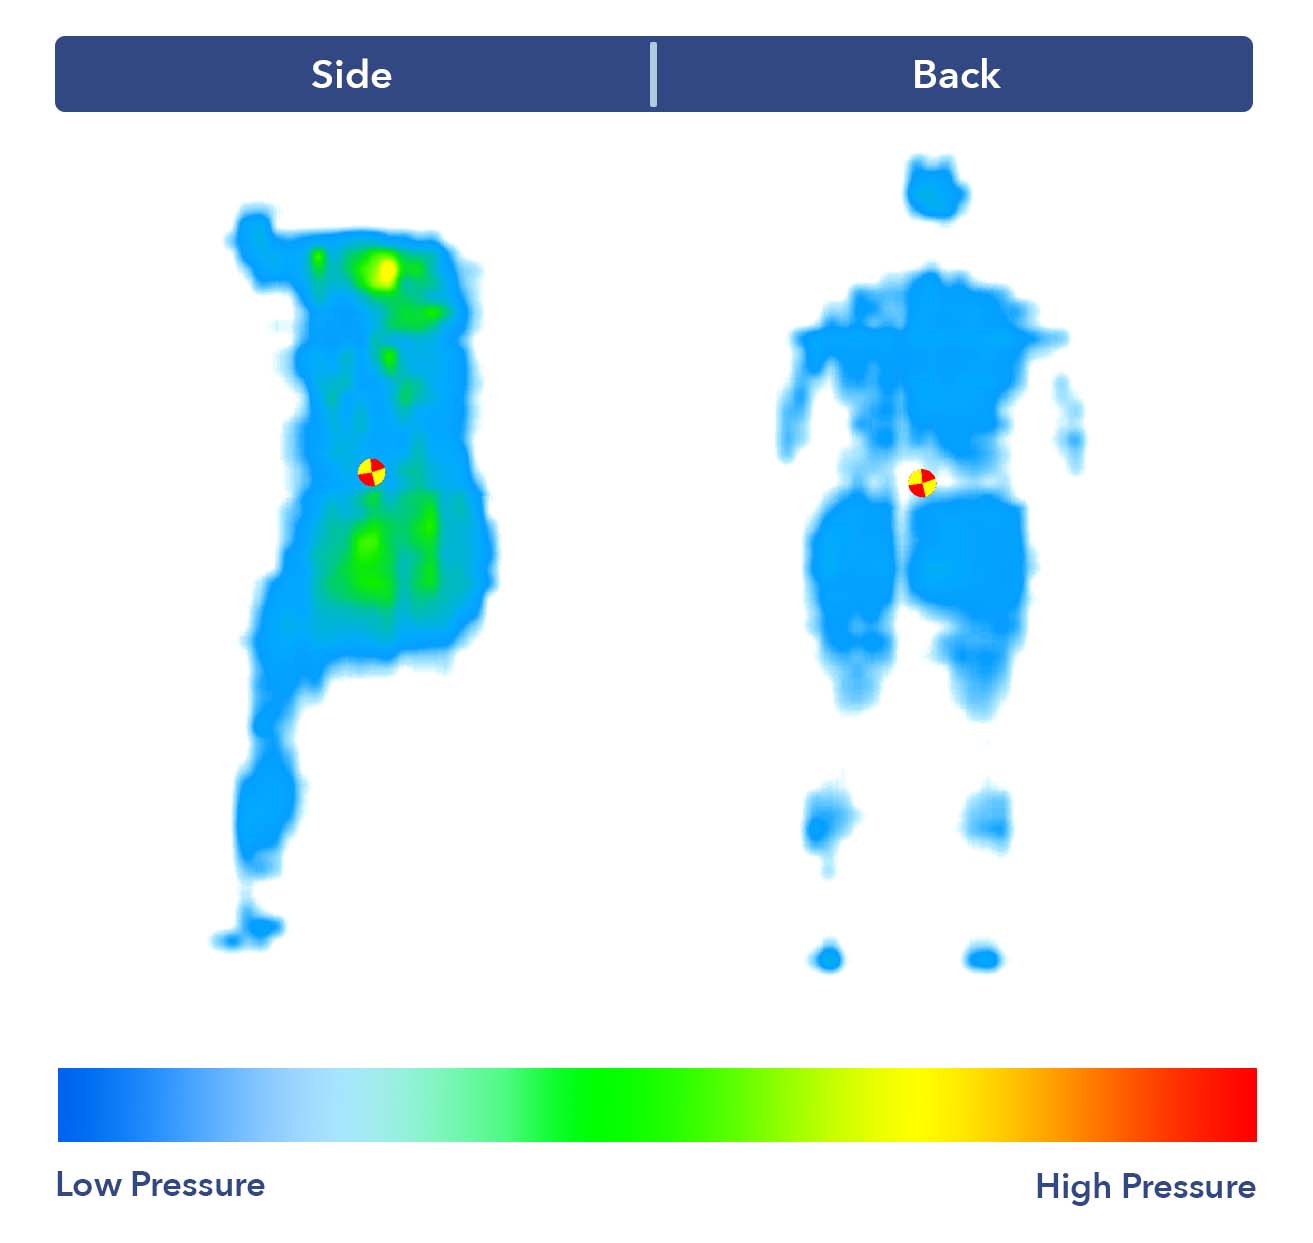 Pressure map results from the Propel Hybrid soft side